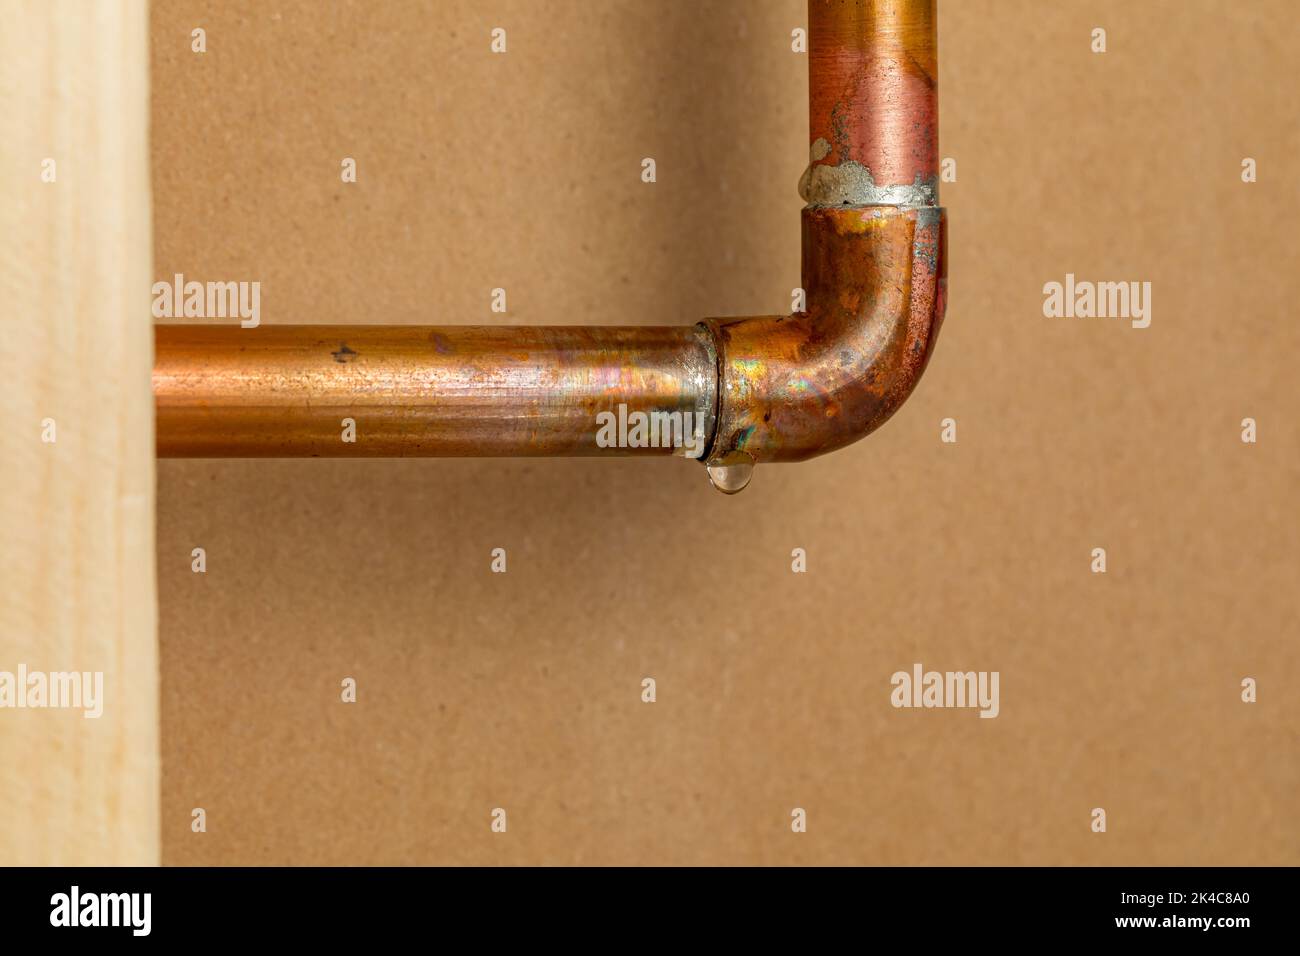 Copper plumbing pipe leaking water inside wall. Home repair, maintenance and remodeling concept. Stock Photo